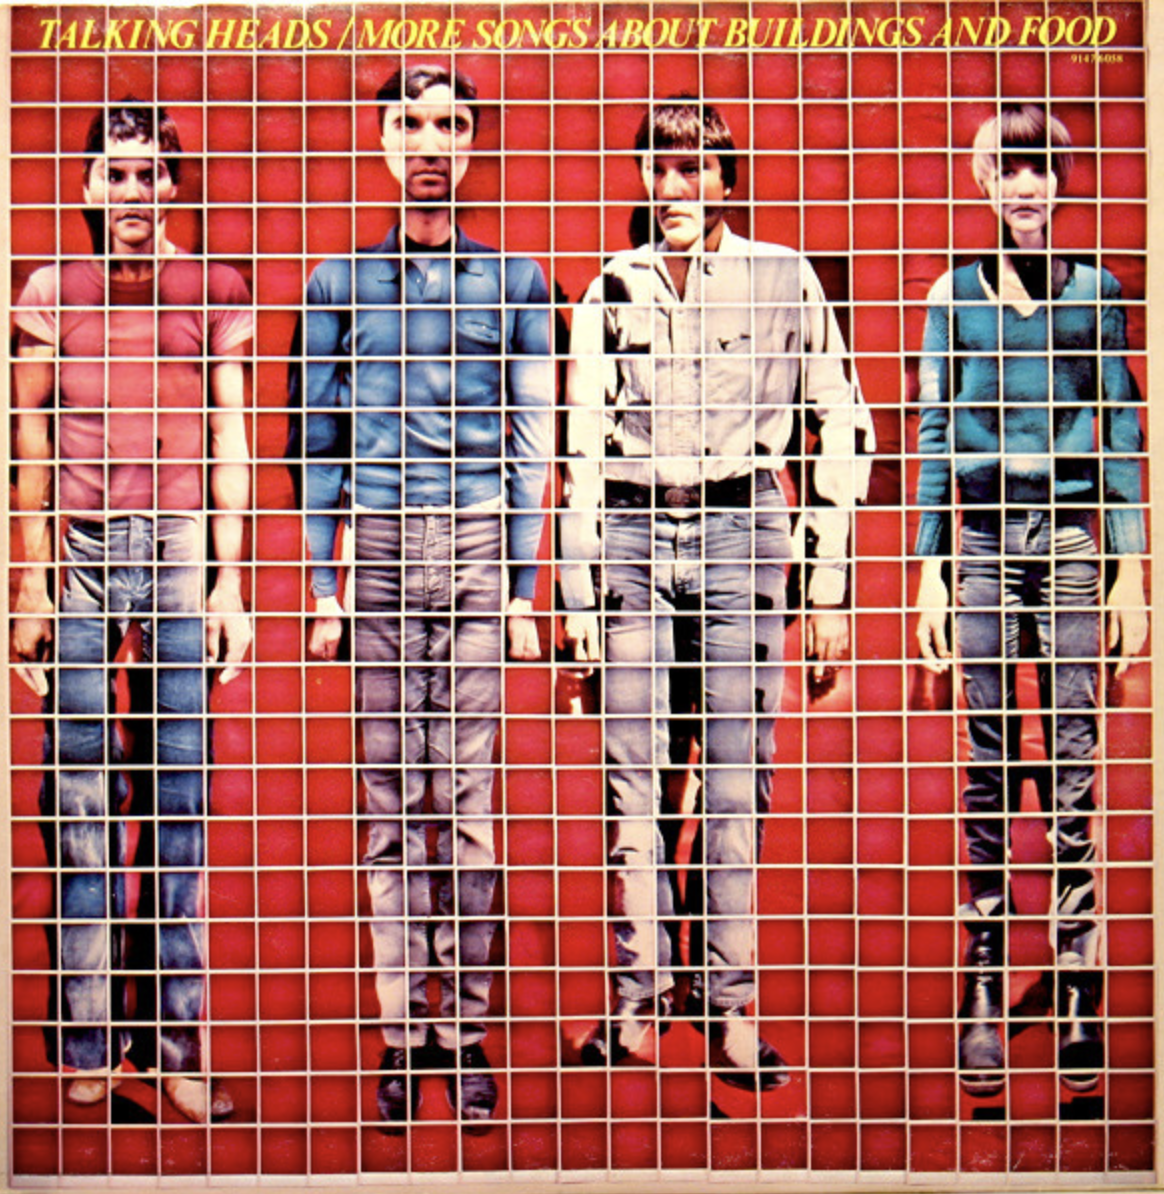 Talking Heads - More Songs About Buildings and Food - BROKEN 8 RECORDS